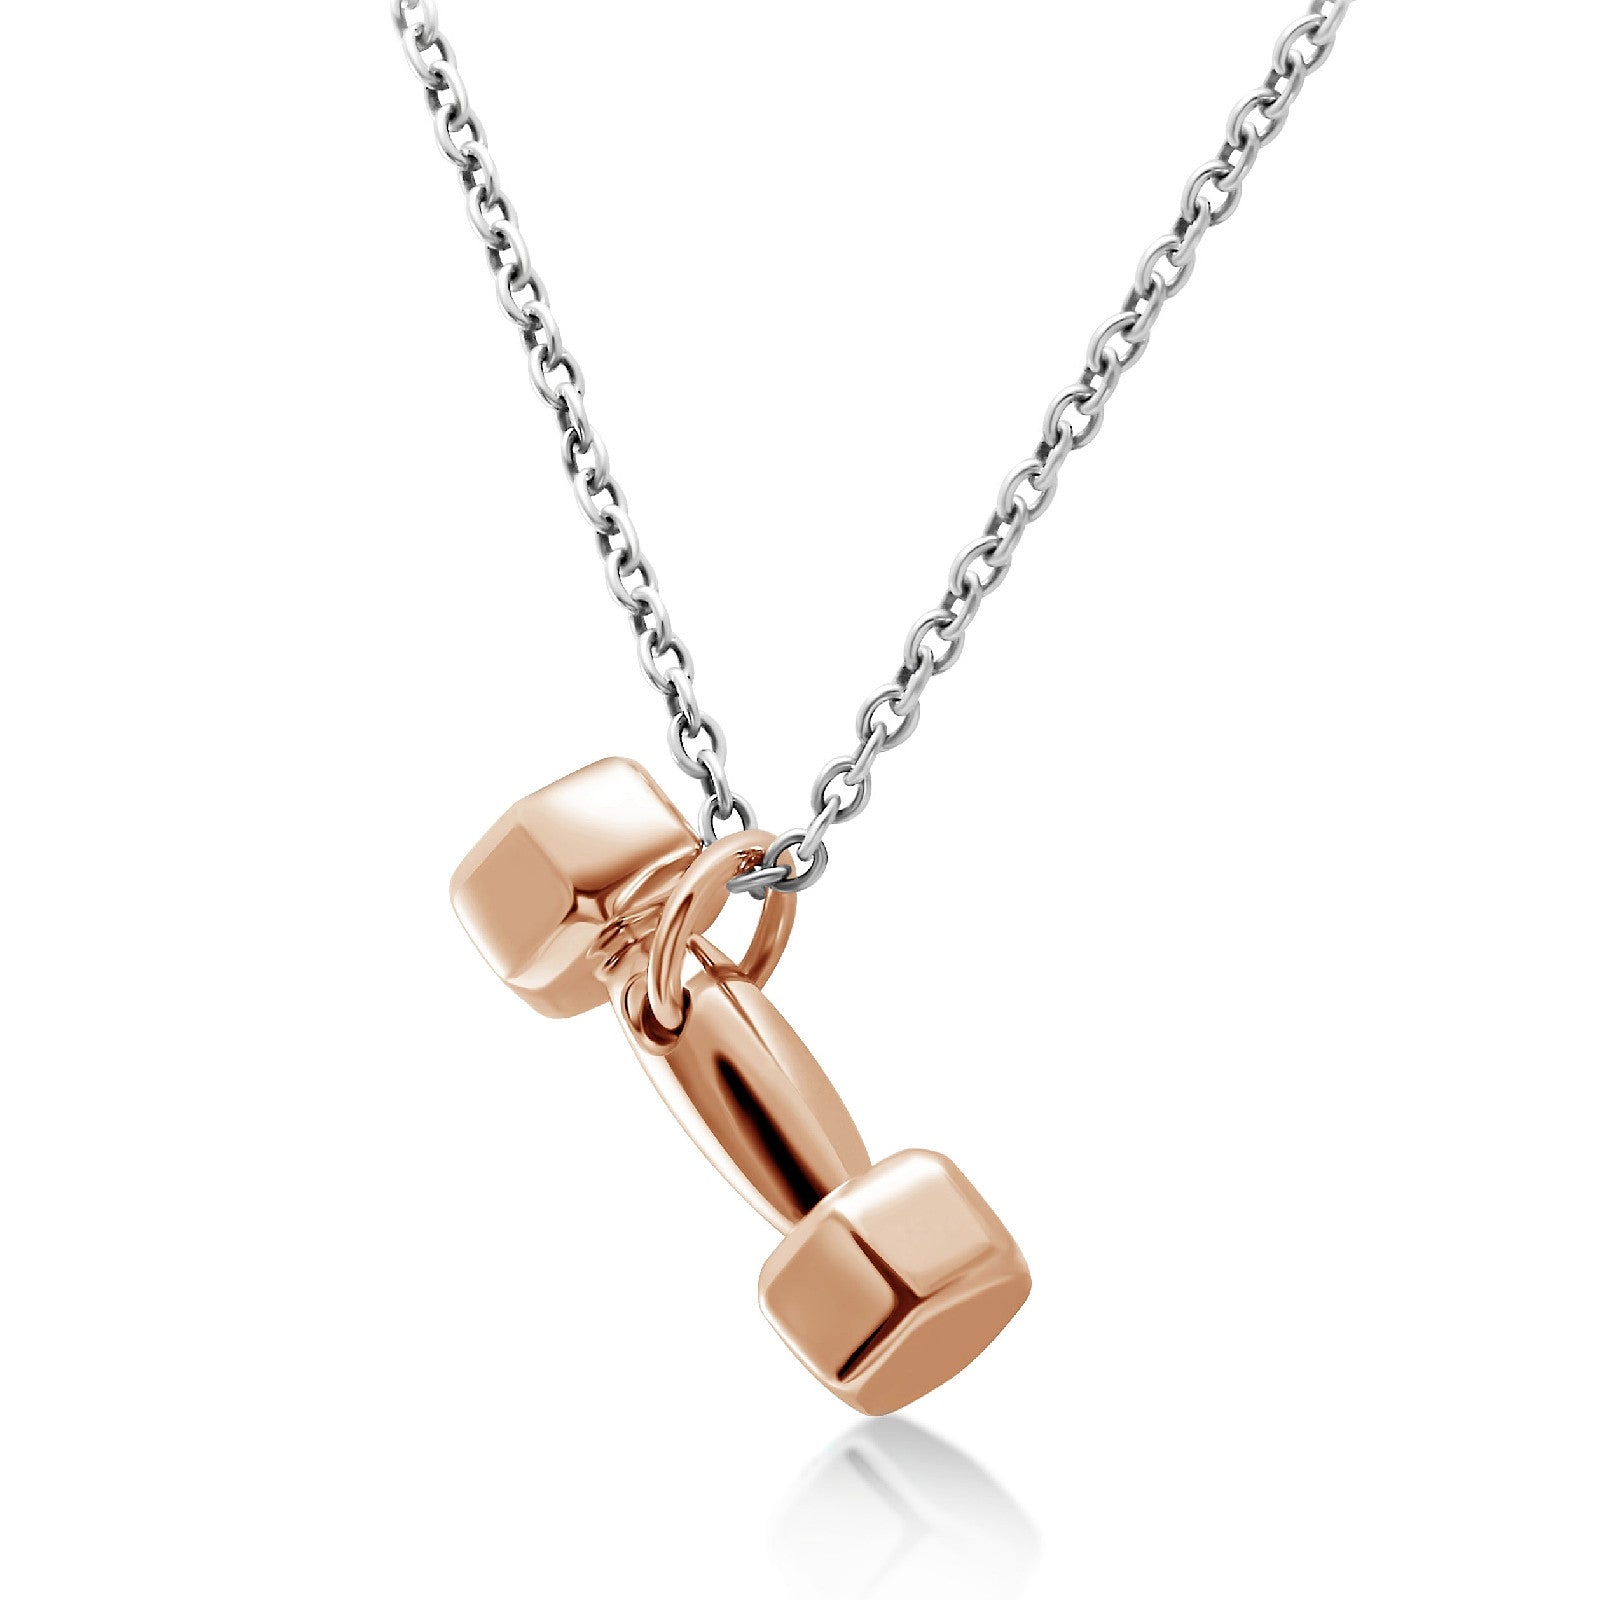 Grand Dumbbell Necklace